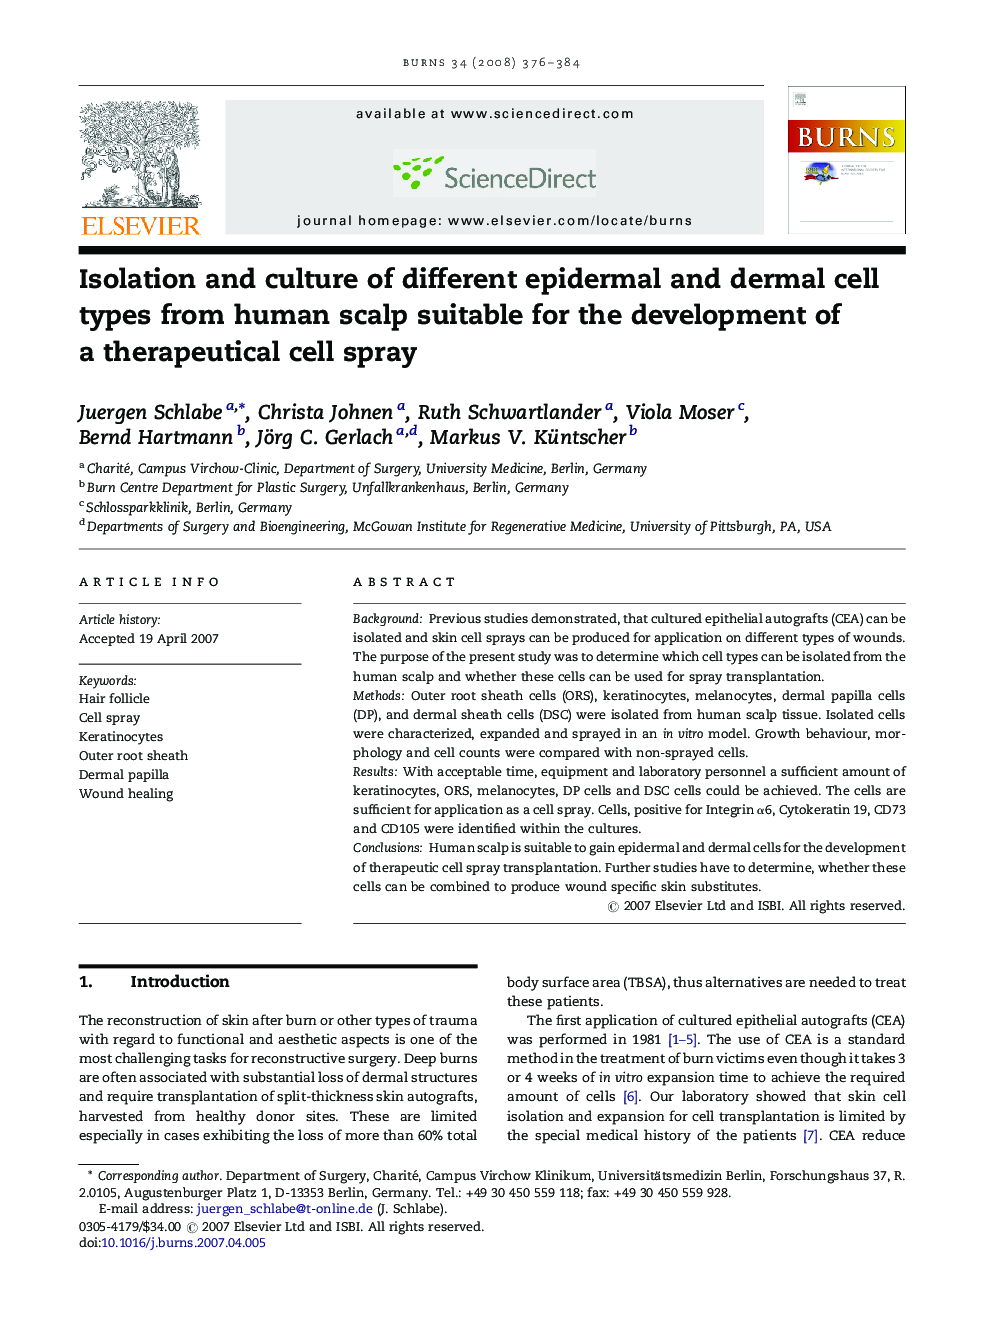 Isolation and culture of different epidermal and dermal cell types from human scalp suitable for the development of a therapeutical cell spray